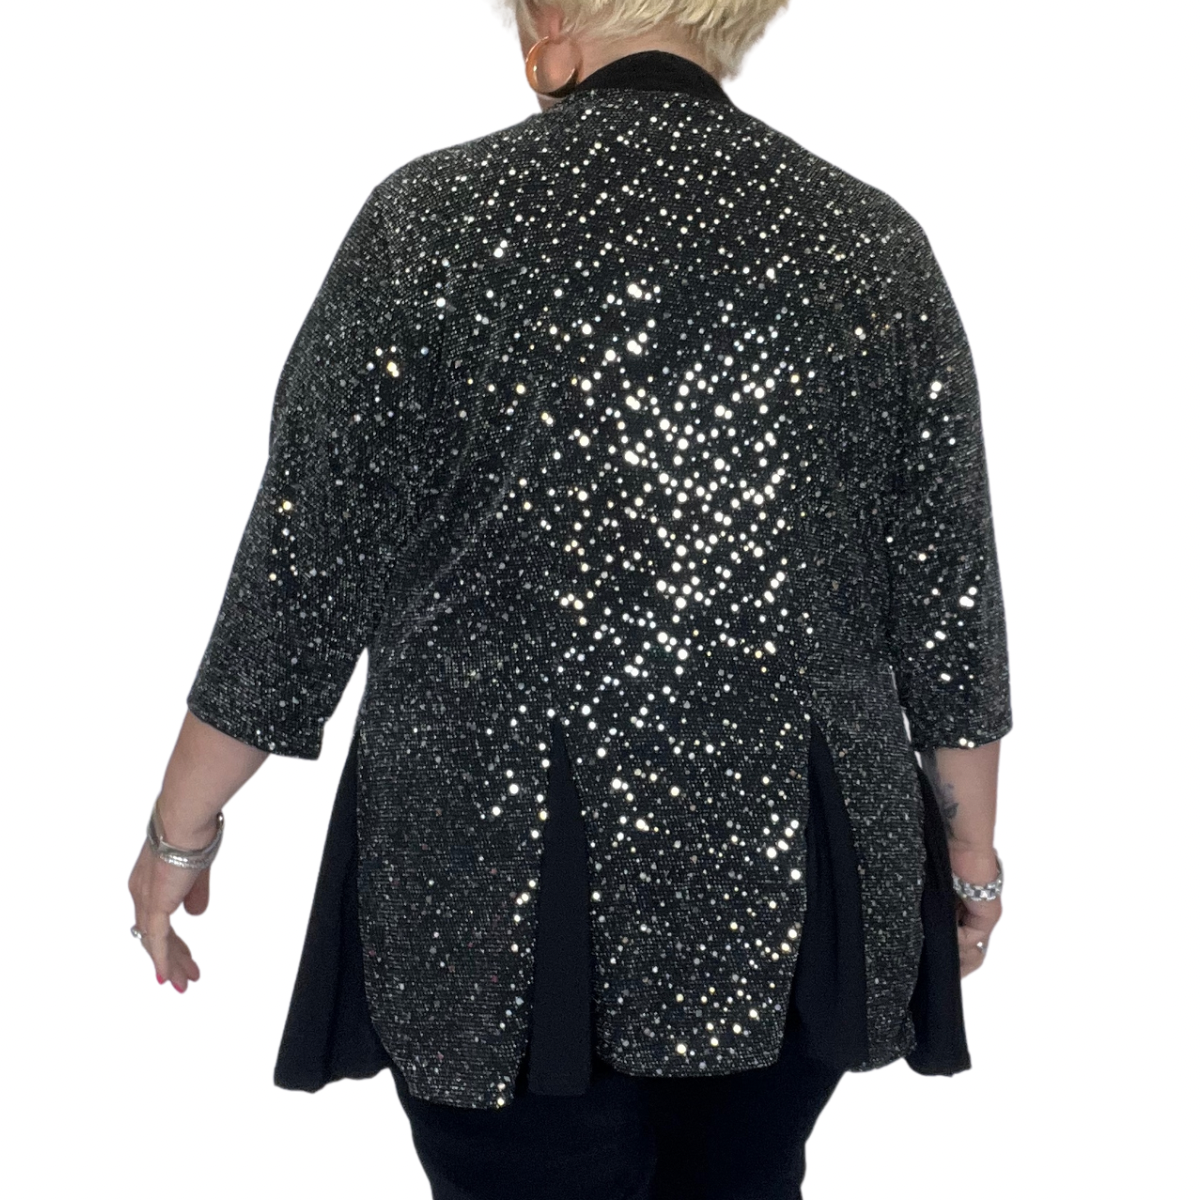 ROCKTHOSECURVES SPARKLY OPEN FRONT PARTY EVENING JACKET WITH SMALL SEQUINS